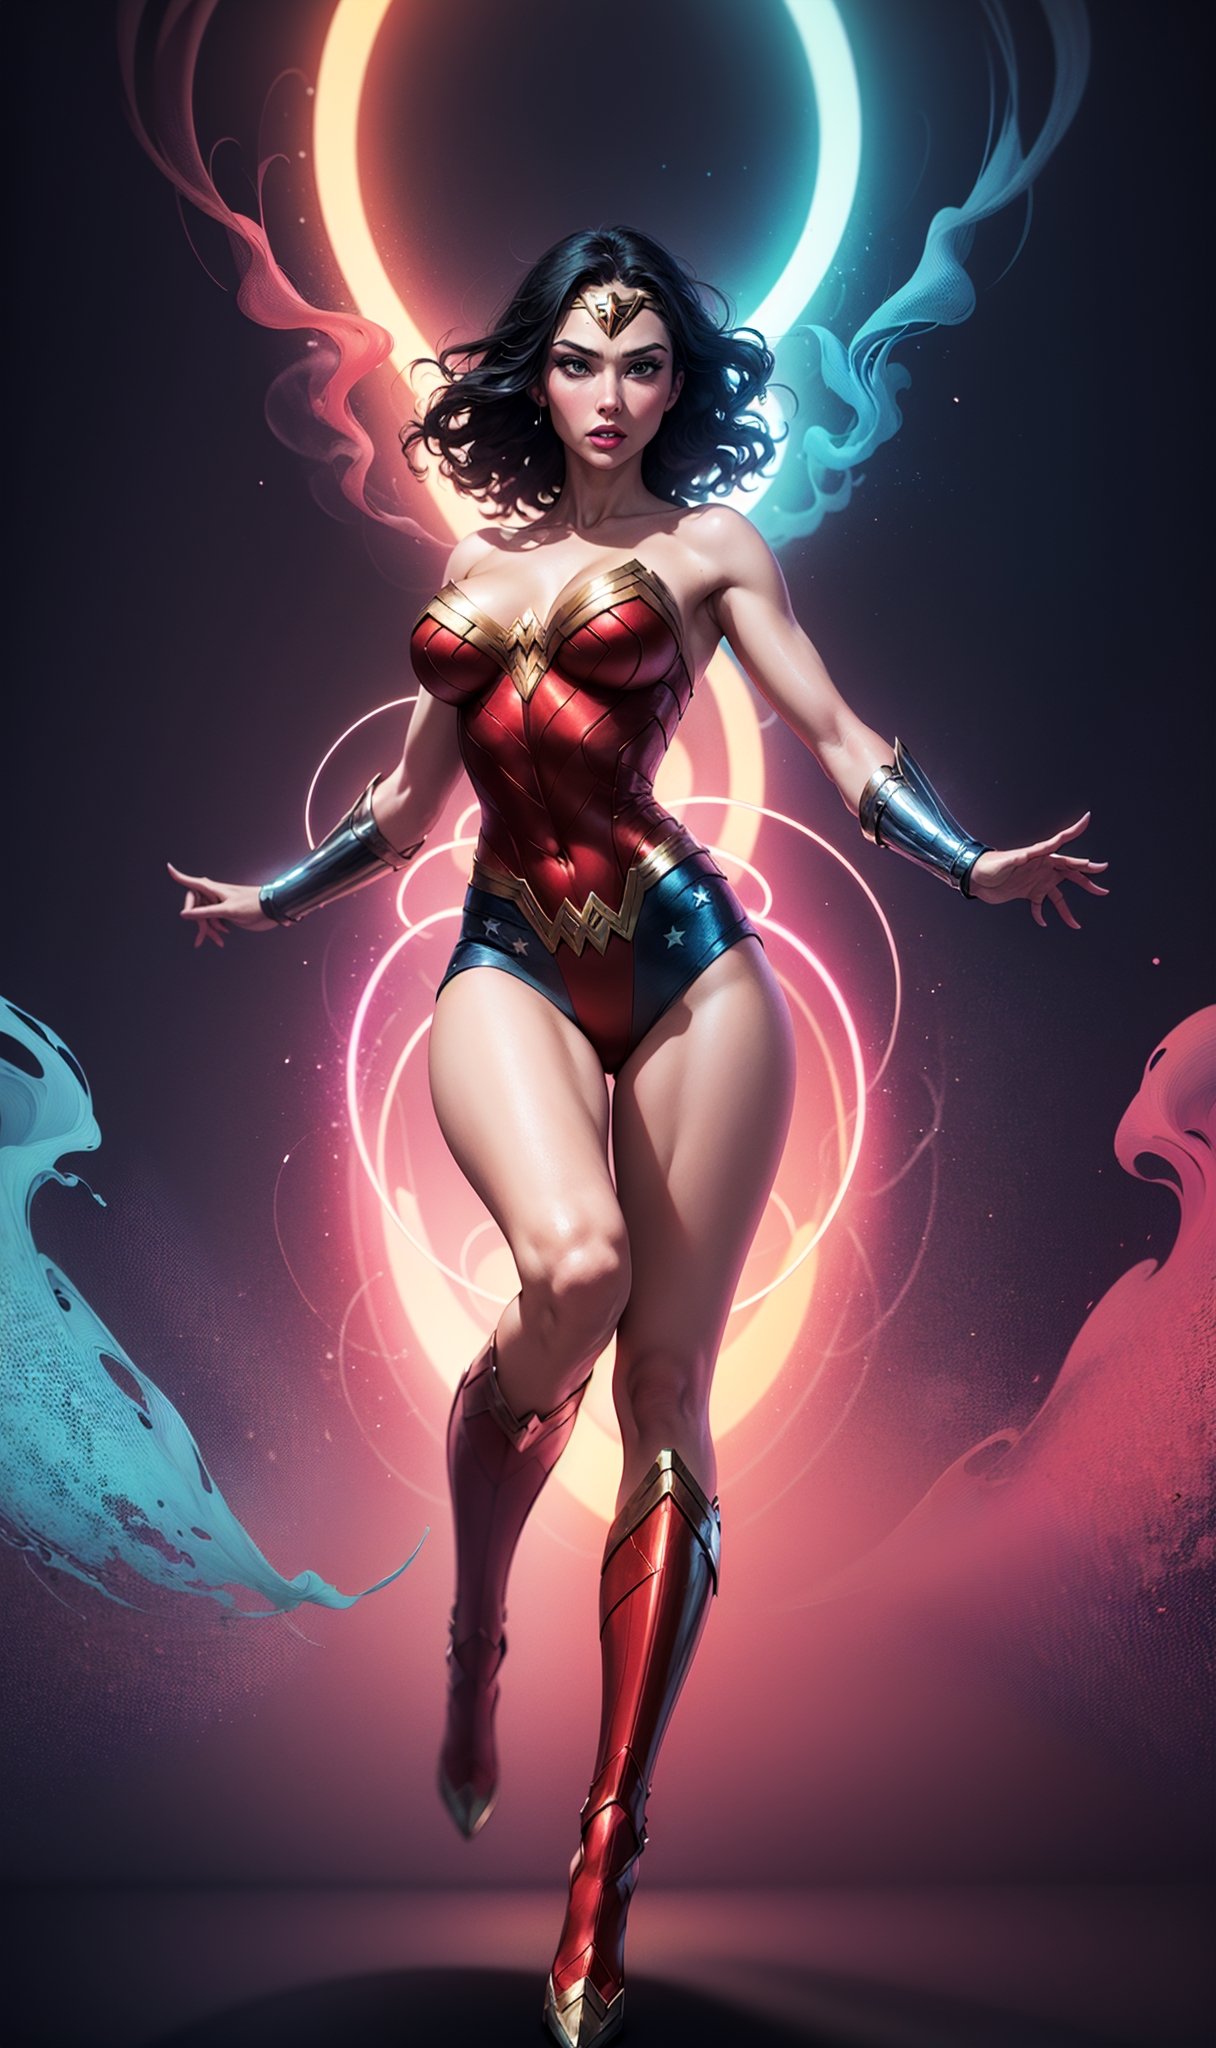 Wonder Woman (big tits),(( view toward viewer,)),((full body)), ((flying at higher rate of speed,)),  body stretched out, masterpiece, best quality, ((abstract, psychedelic, neon, smoke , background)),(creative:1.3), sy3, SMM, fantasy00d